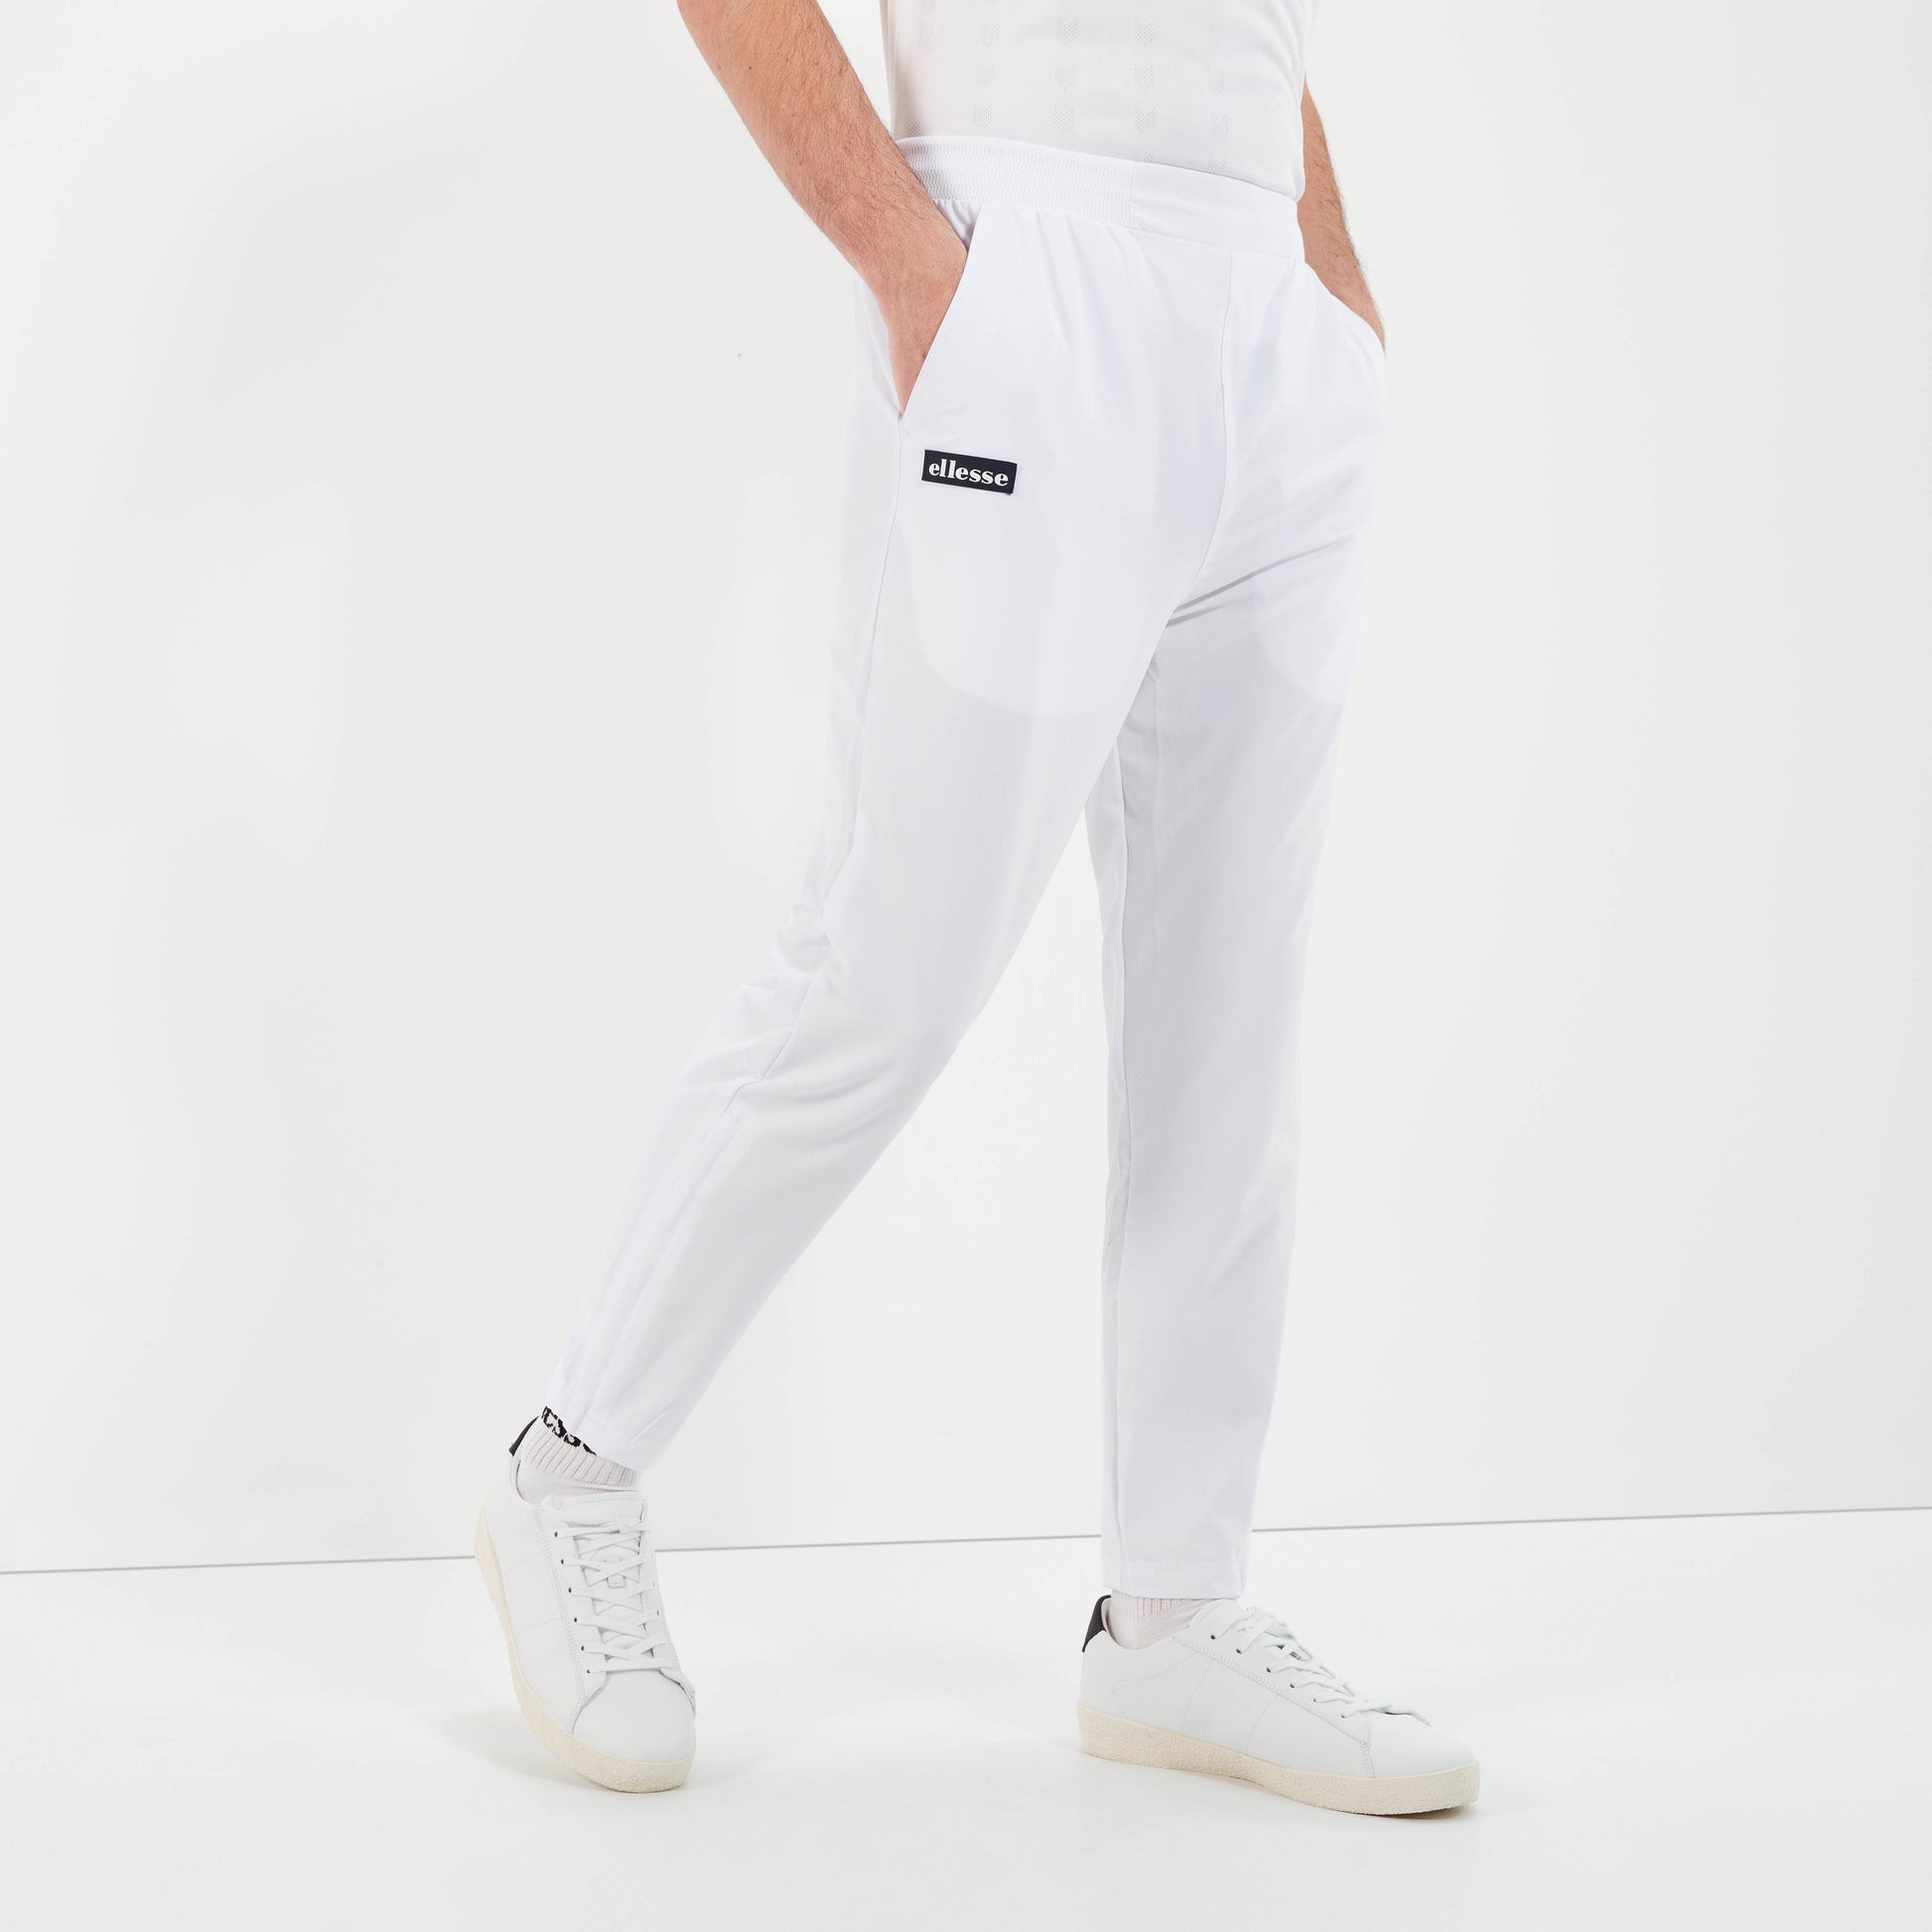 Mens LOGO Skinny Fit Sweatpants Mens Slim Fit Cotton Joggers For Running,  Bodybuilding, And Jogging From Tybd7785321, $12.79 | DHgate.Com